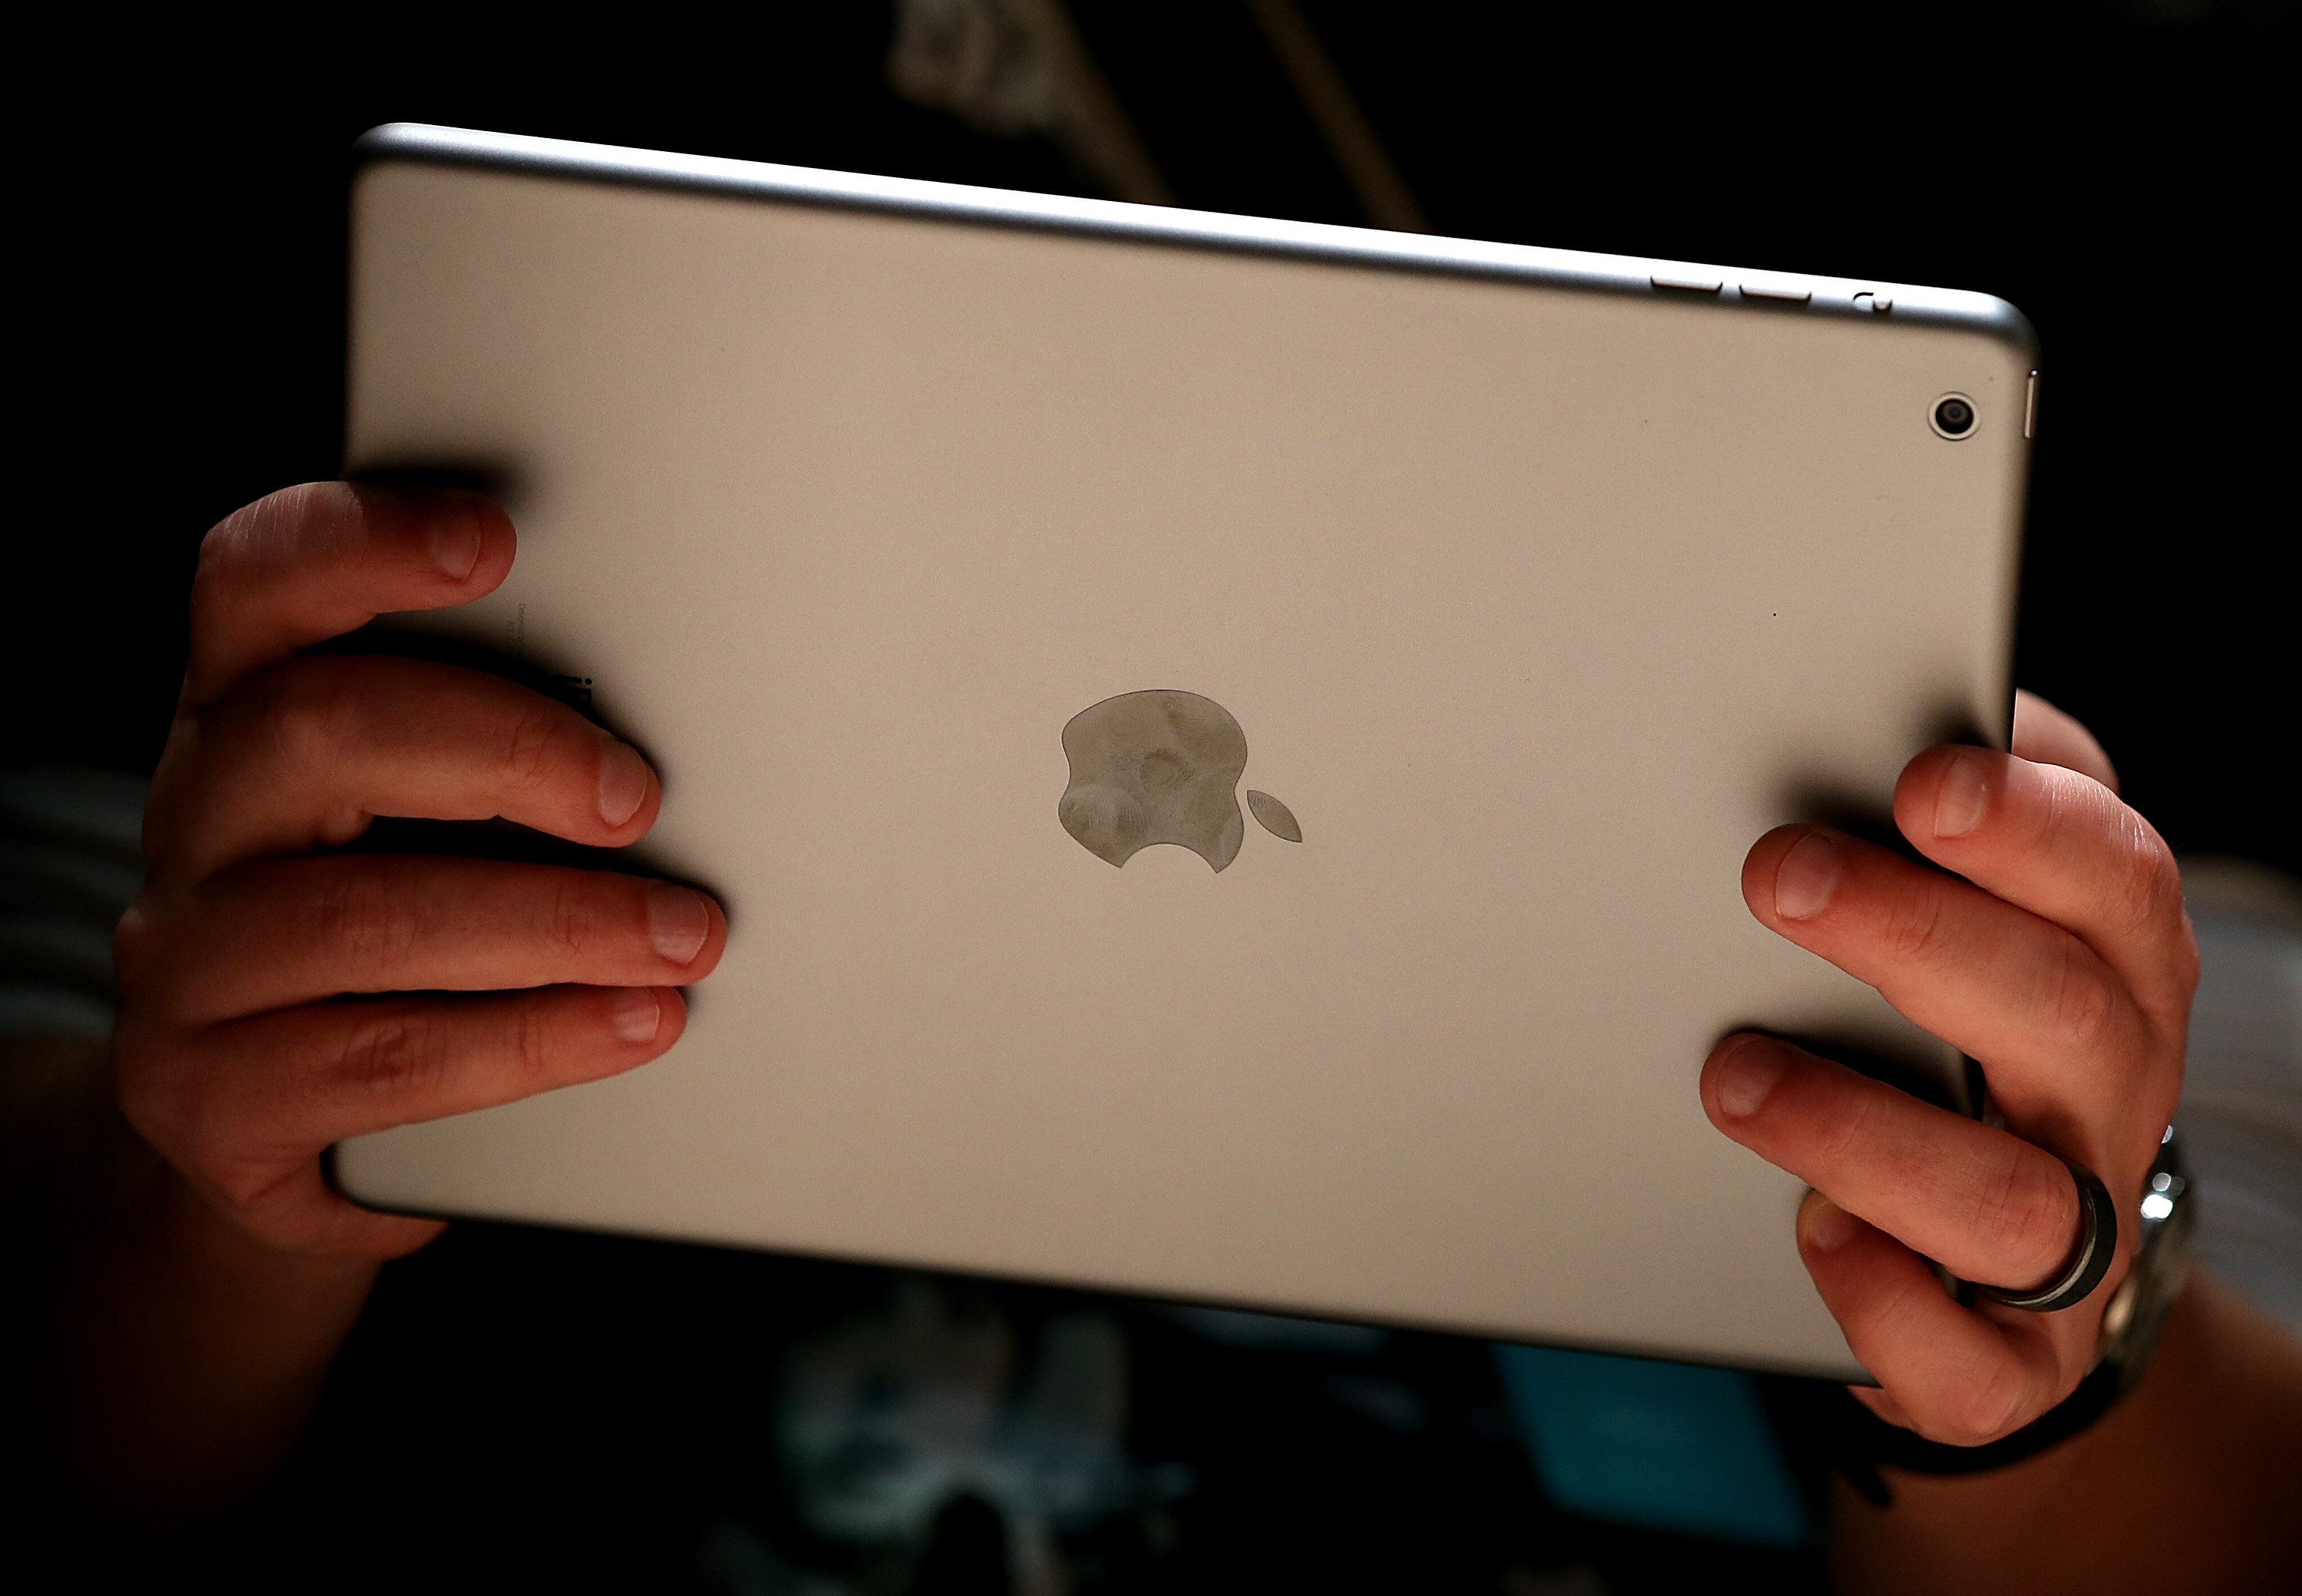 An attendee looks at the new iPad Air during an Apple announcement at the Yerba Buena Center for the Arts on October 22, 2013 in San Francisco, California. (Justin Sullivan—Getty Images)